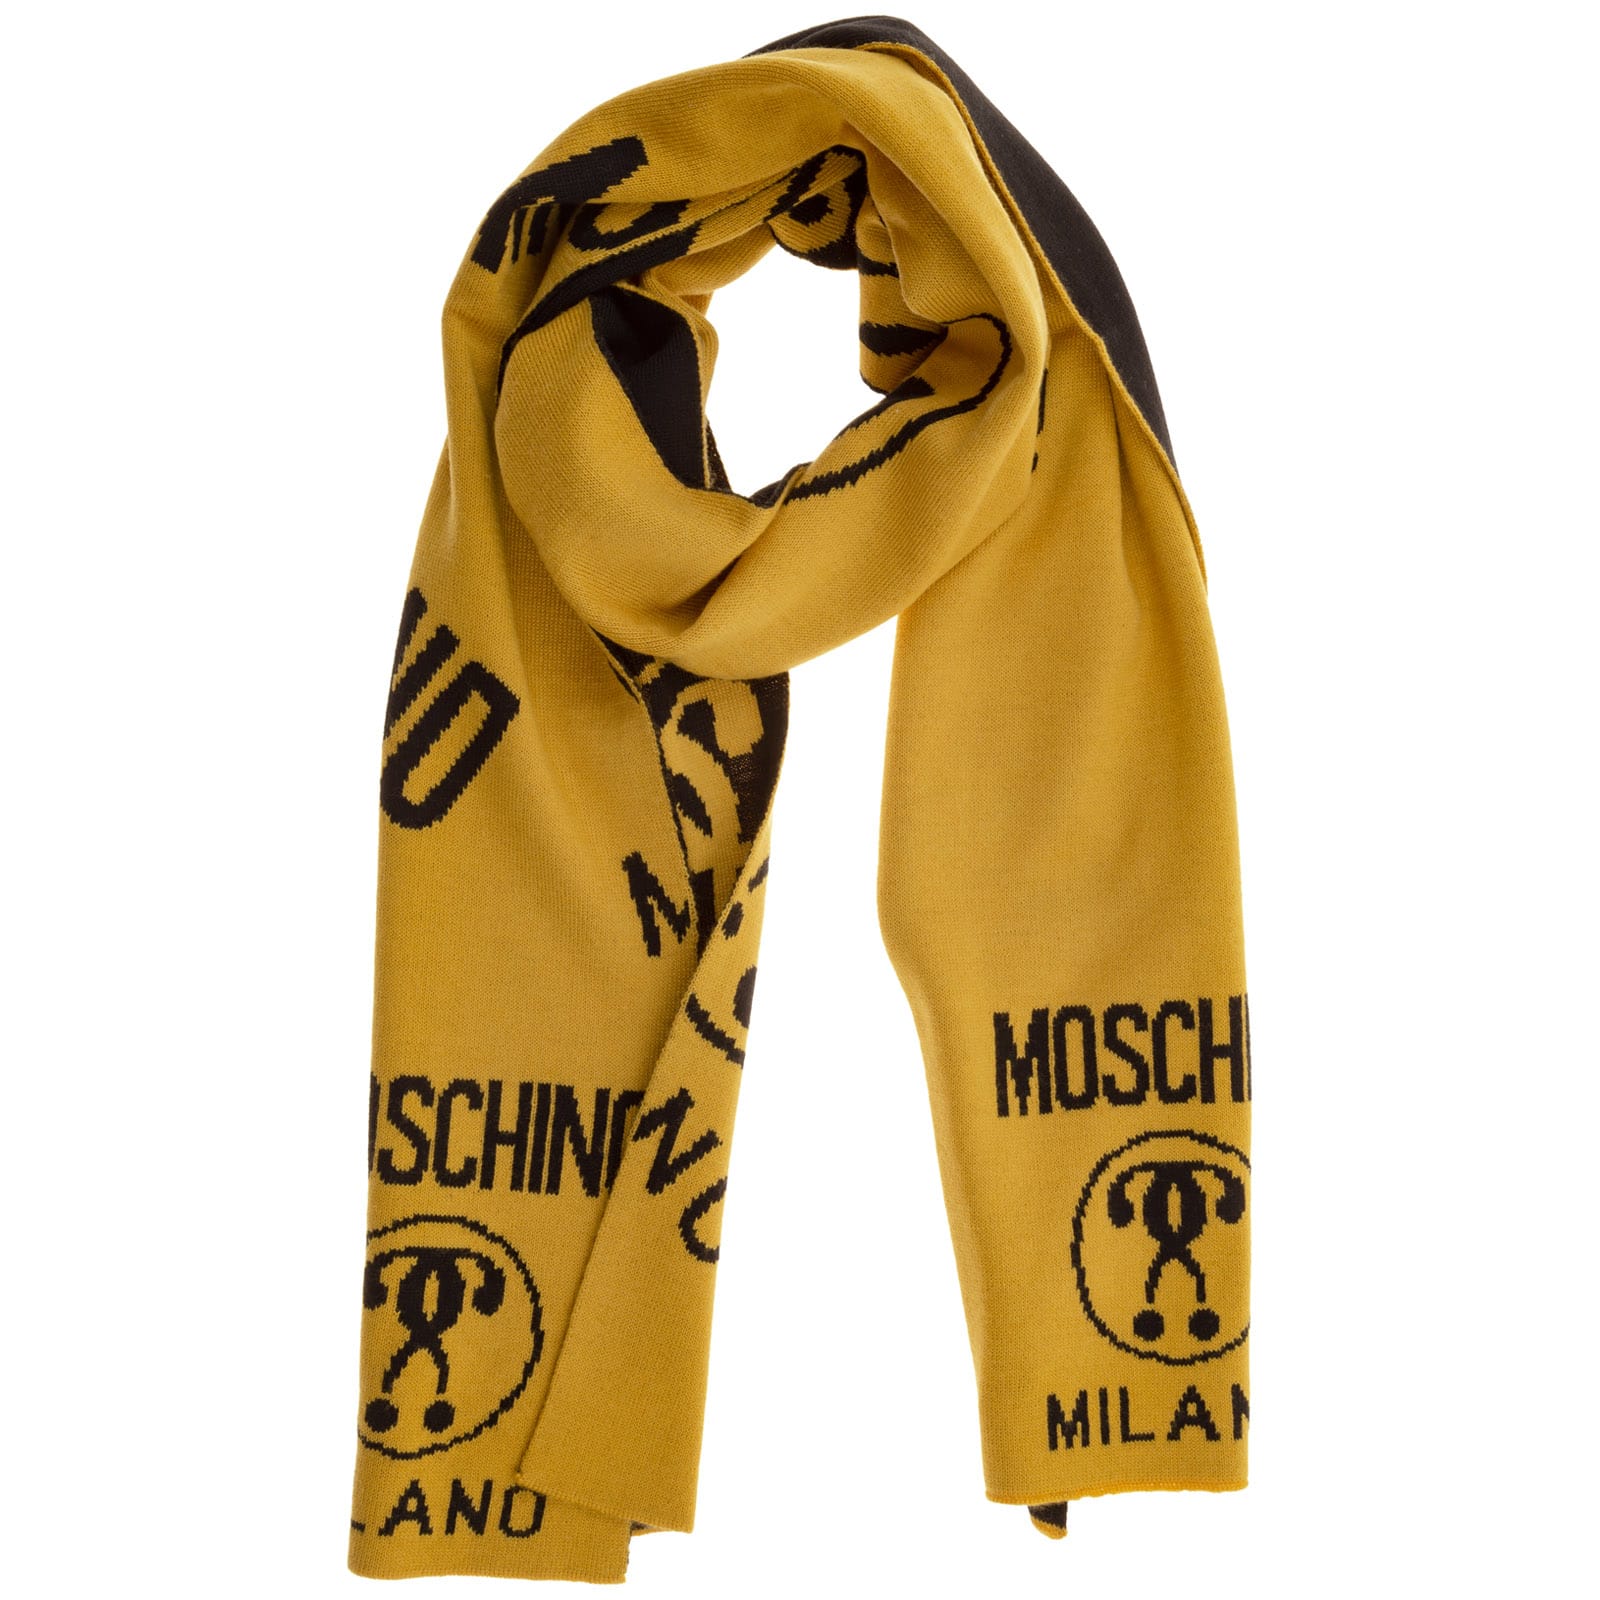 MOSCHINO DOUBLE QUESTION MARK SCARF,M514550055005